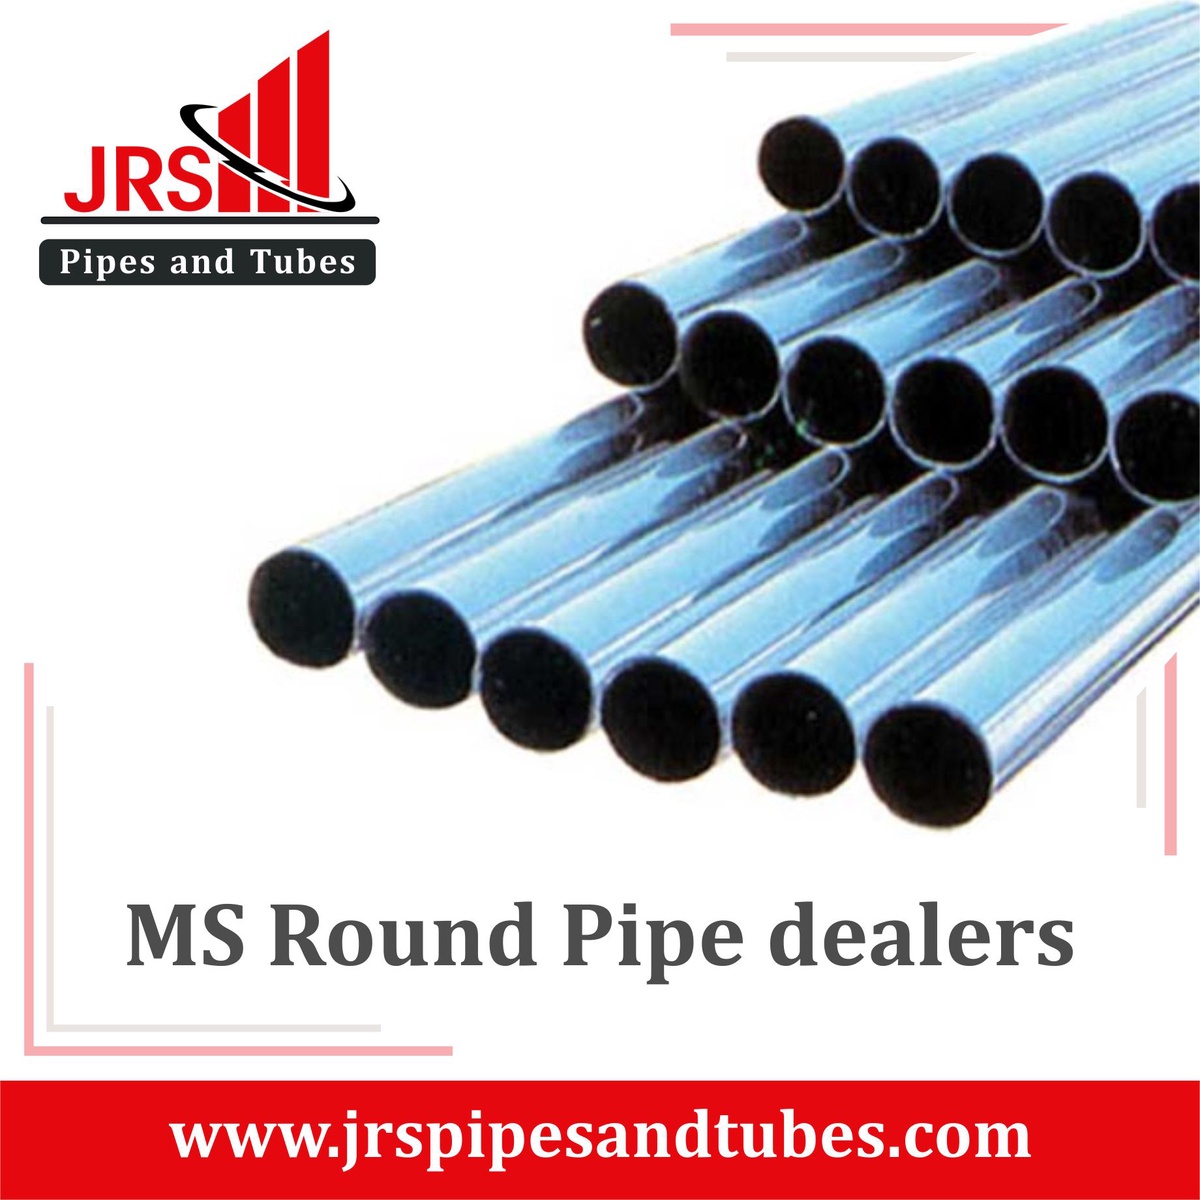 Which is the Best MS Round Pipe in India? And the Importance of MS Square Pipe